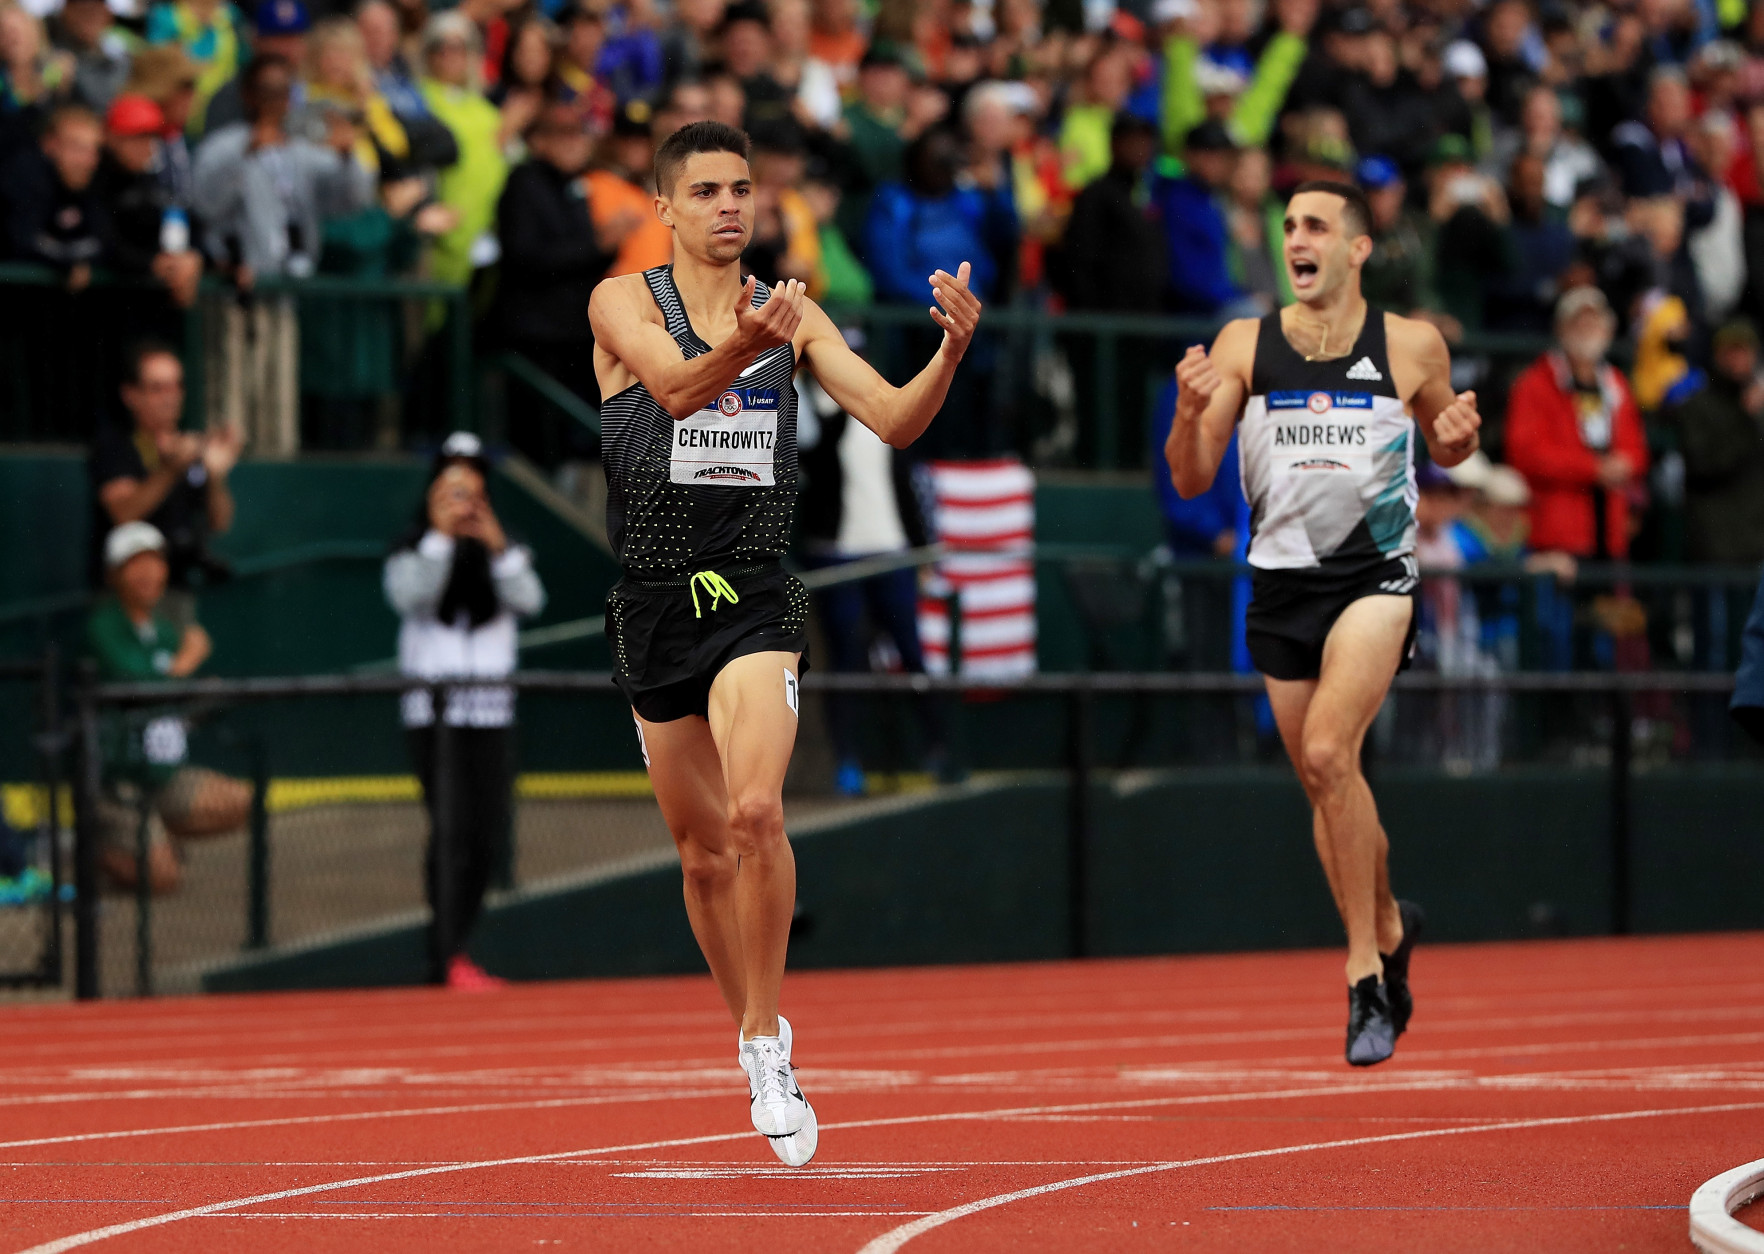 EUGENE, OR - JULY 10:  Matthew Centrowitz crosses the finishline to place first in the Men's 1500 Meter Final during the 2016 U.S. Olympic Track &amp; Field Team Trials at Hayward Field on July 10, 2016 in Eugene, Oregon.  (Photo by Cliff Hawkins/Getty Images)